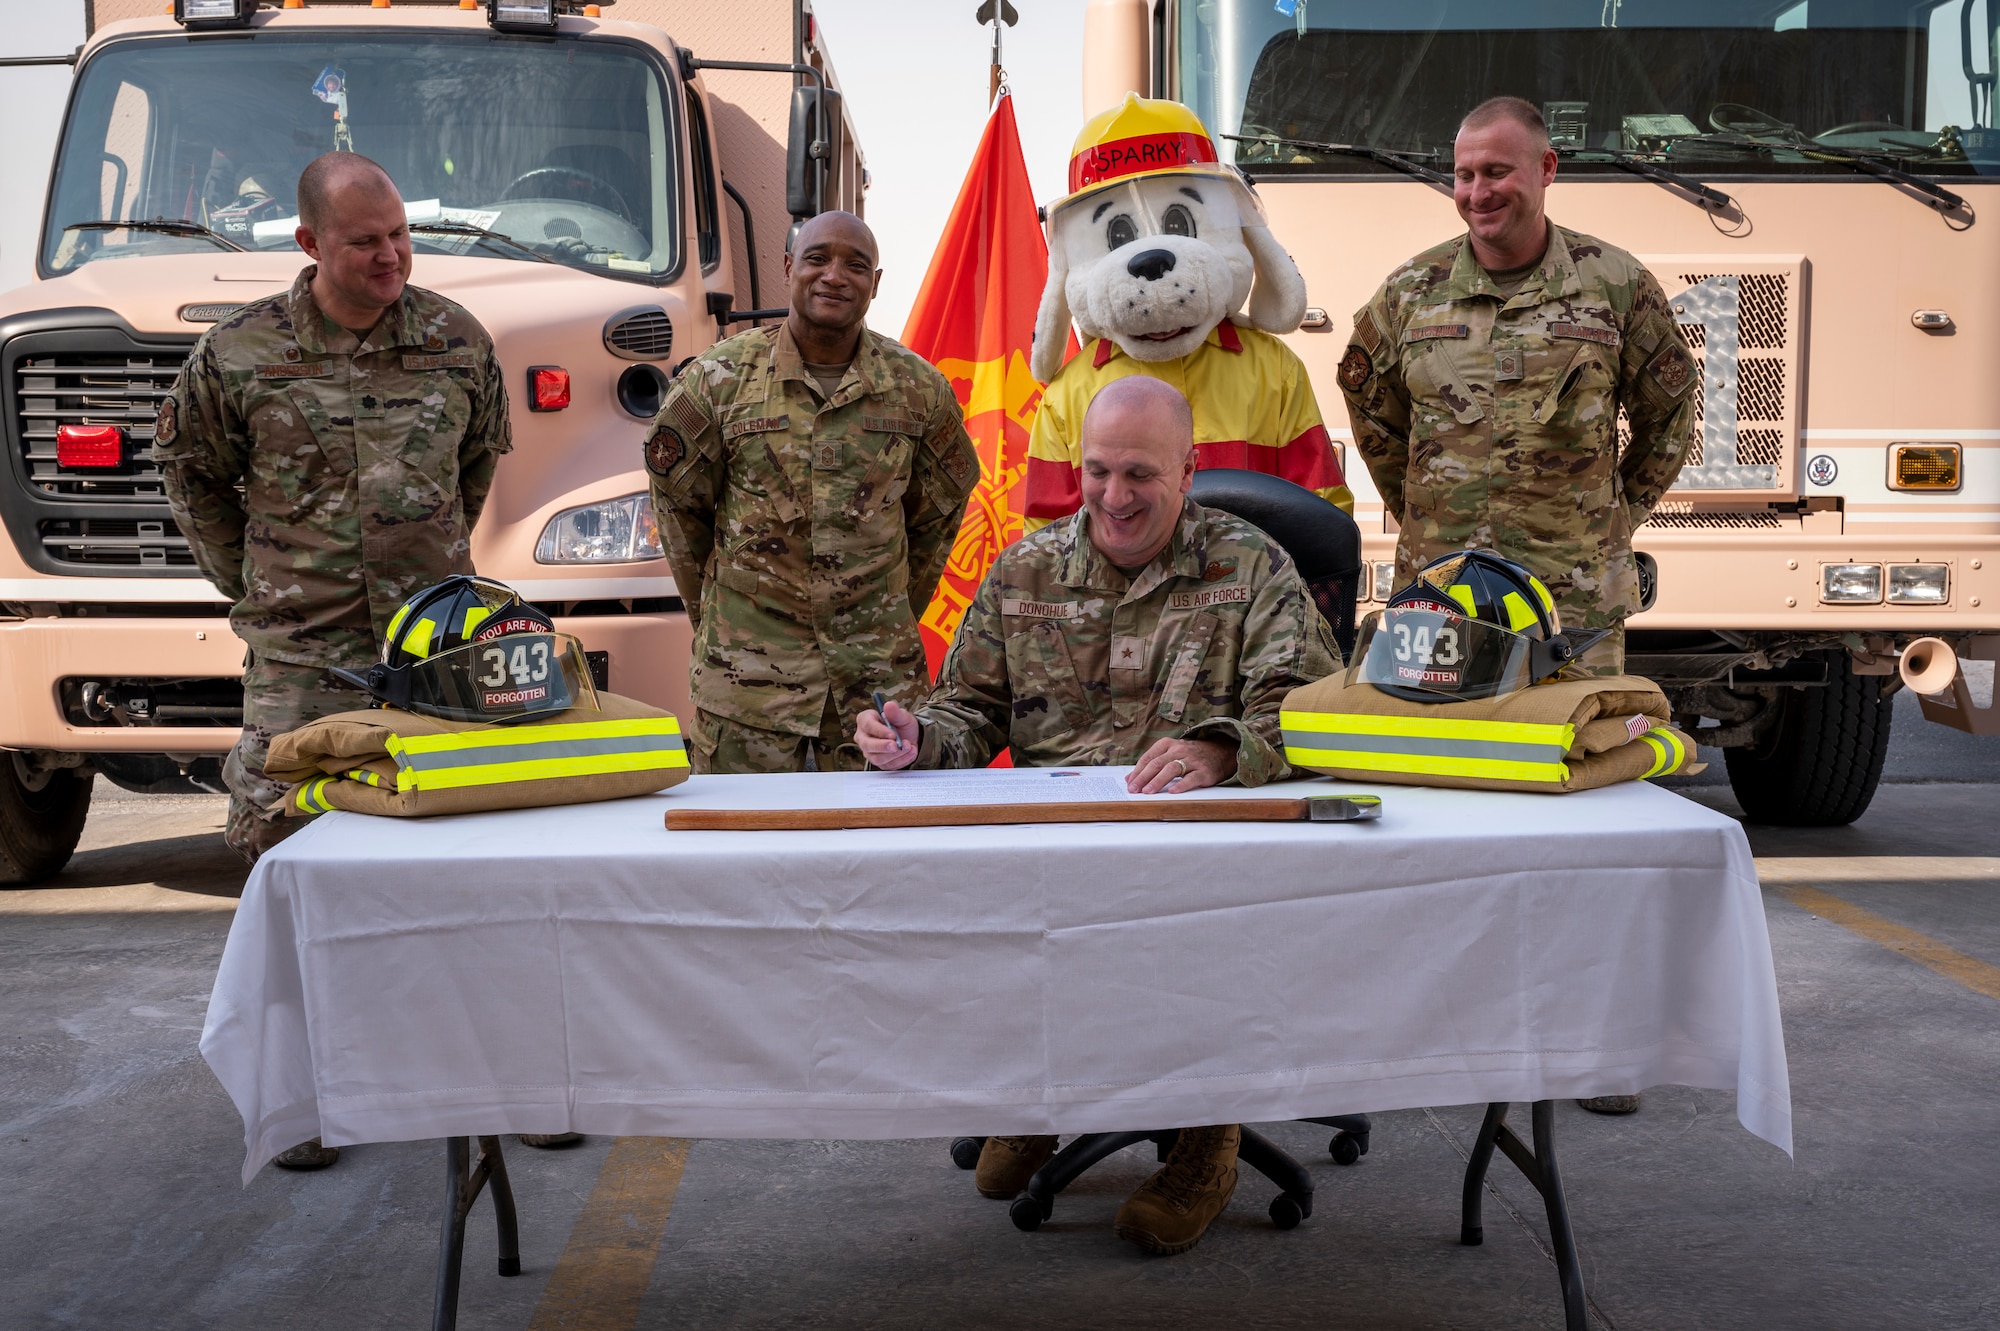 Brig. Gen. Gerald Donohue, 379th Air Expeditionary Wing commander, signs the Fire Prevention Week proclamation outside the 379th Expeditionary Civil Engineer Squadron Oct. 5, 2021, at Al Udeid Air Base, Qatar.